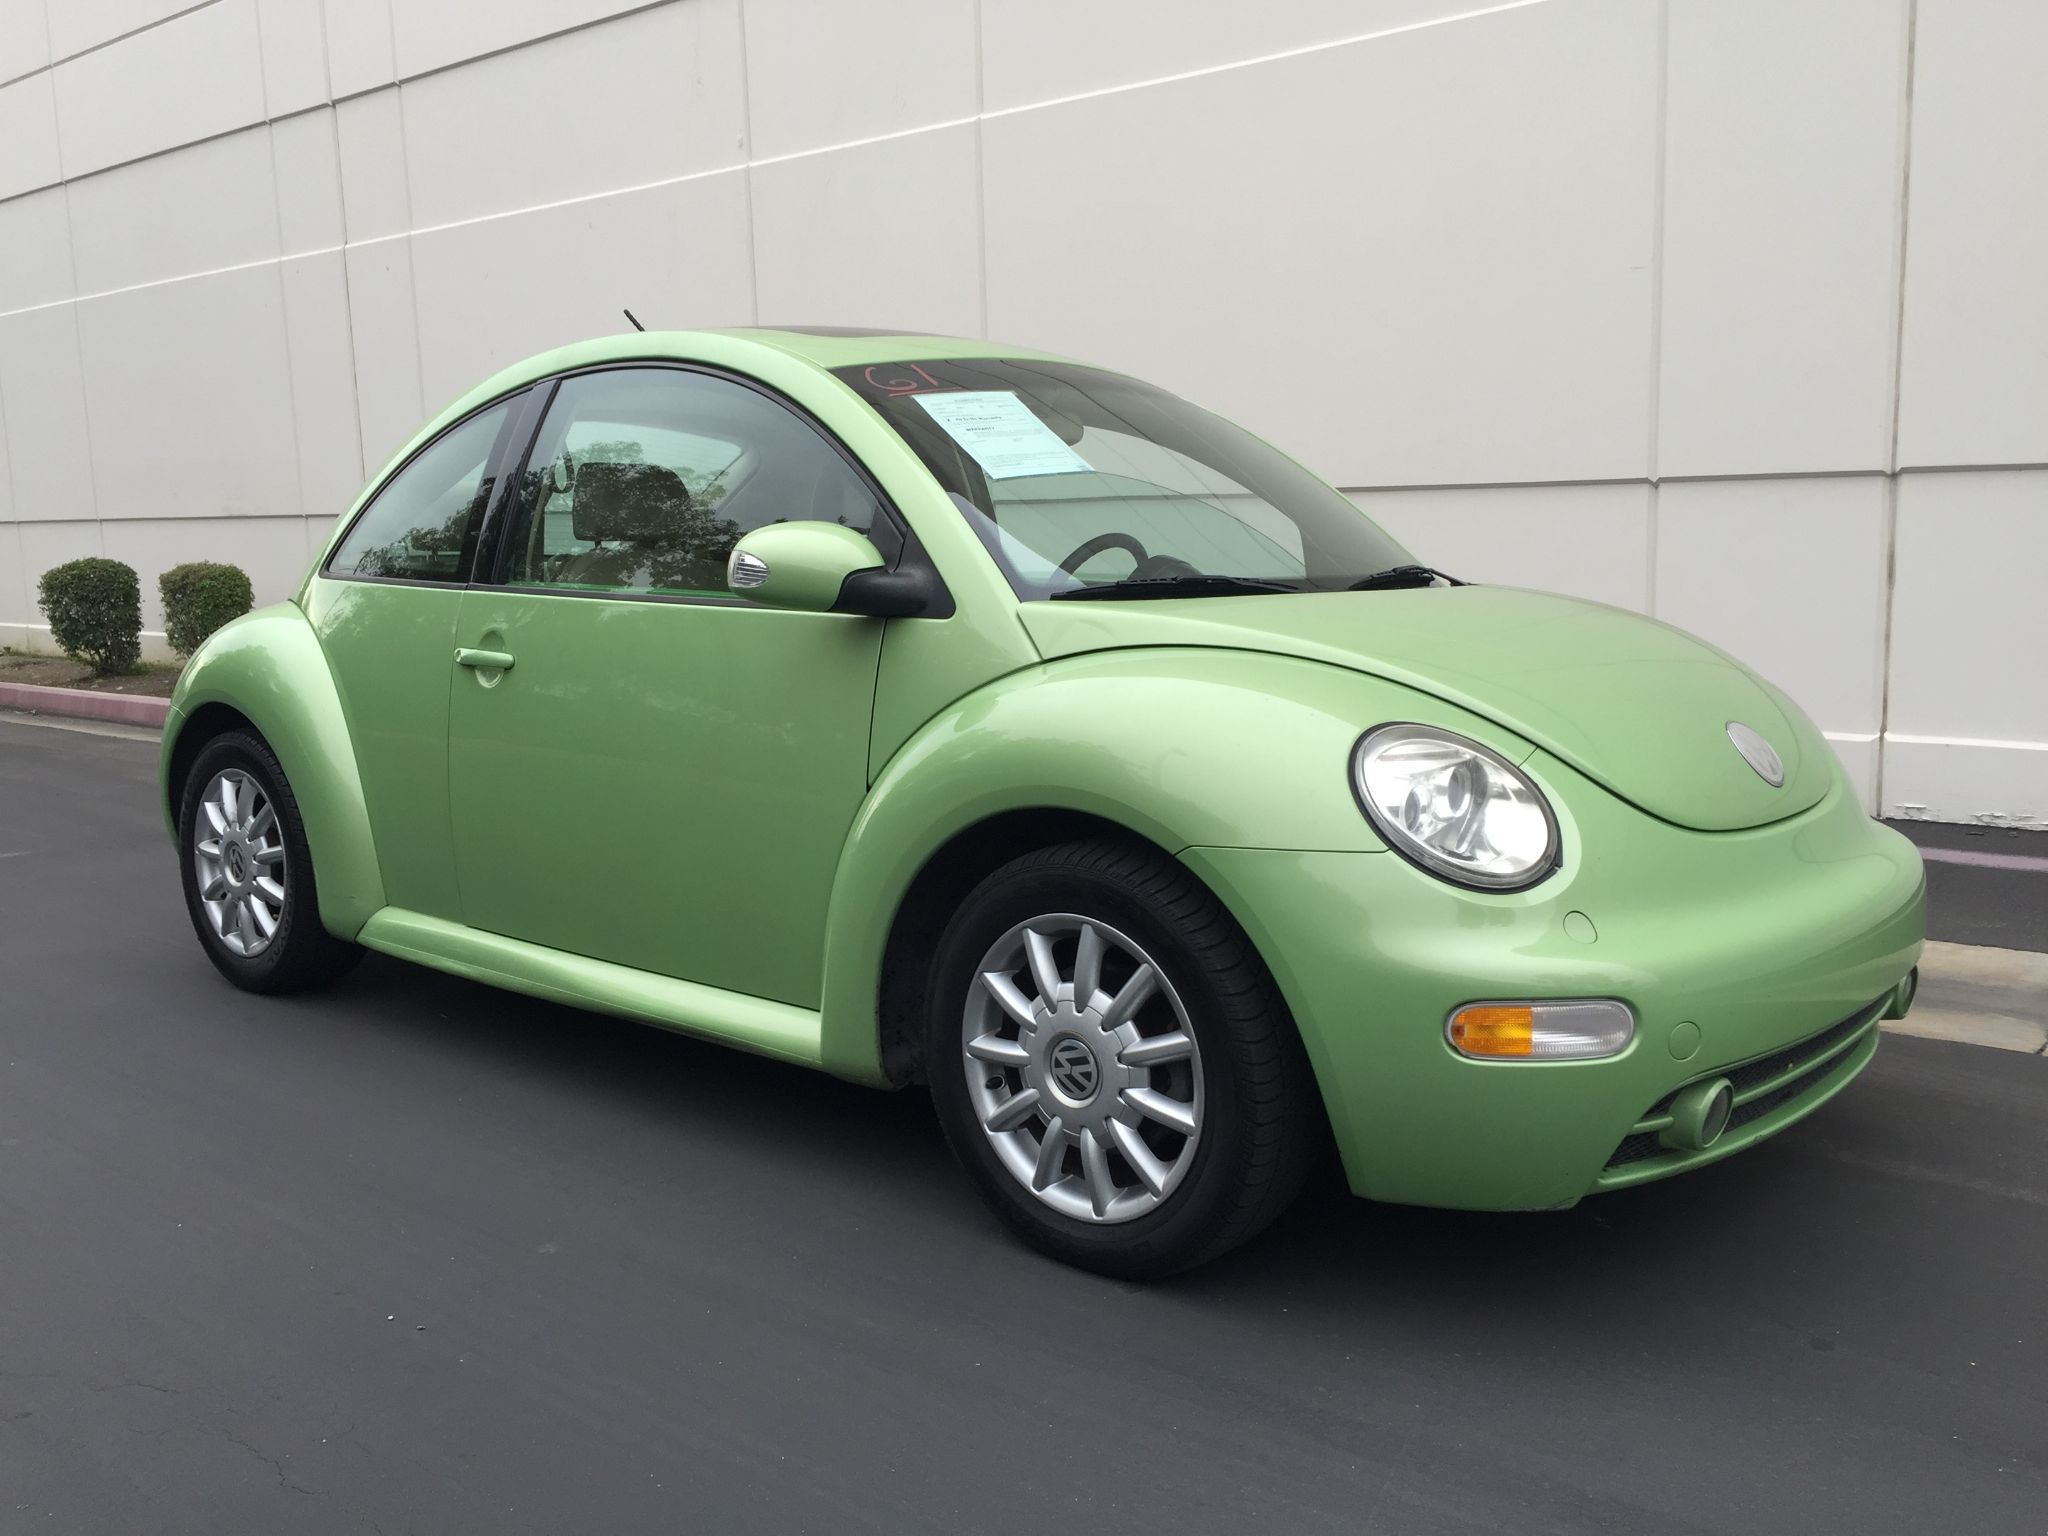 Used 2005 Volkswagen New Beetle GLS at City Cars Warehouse INC